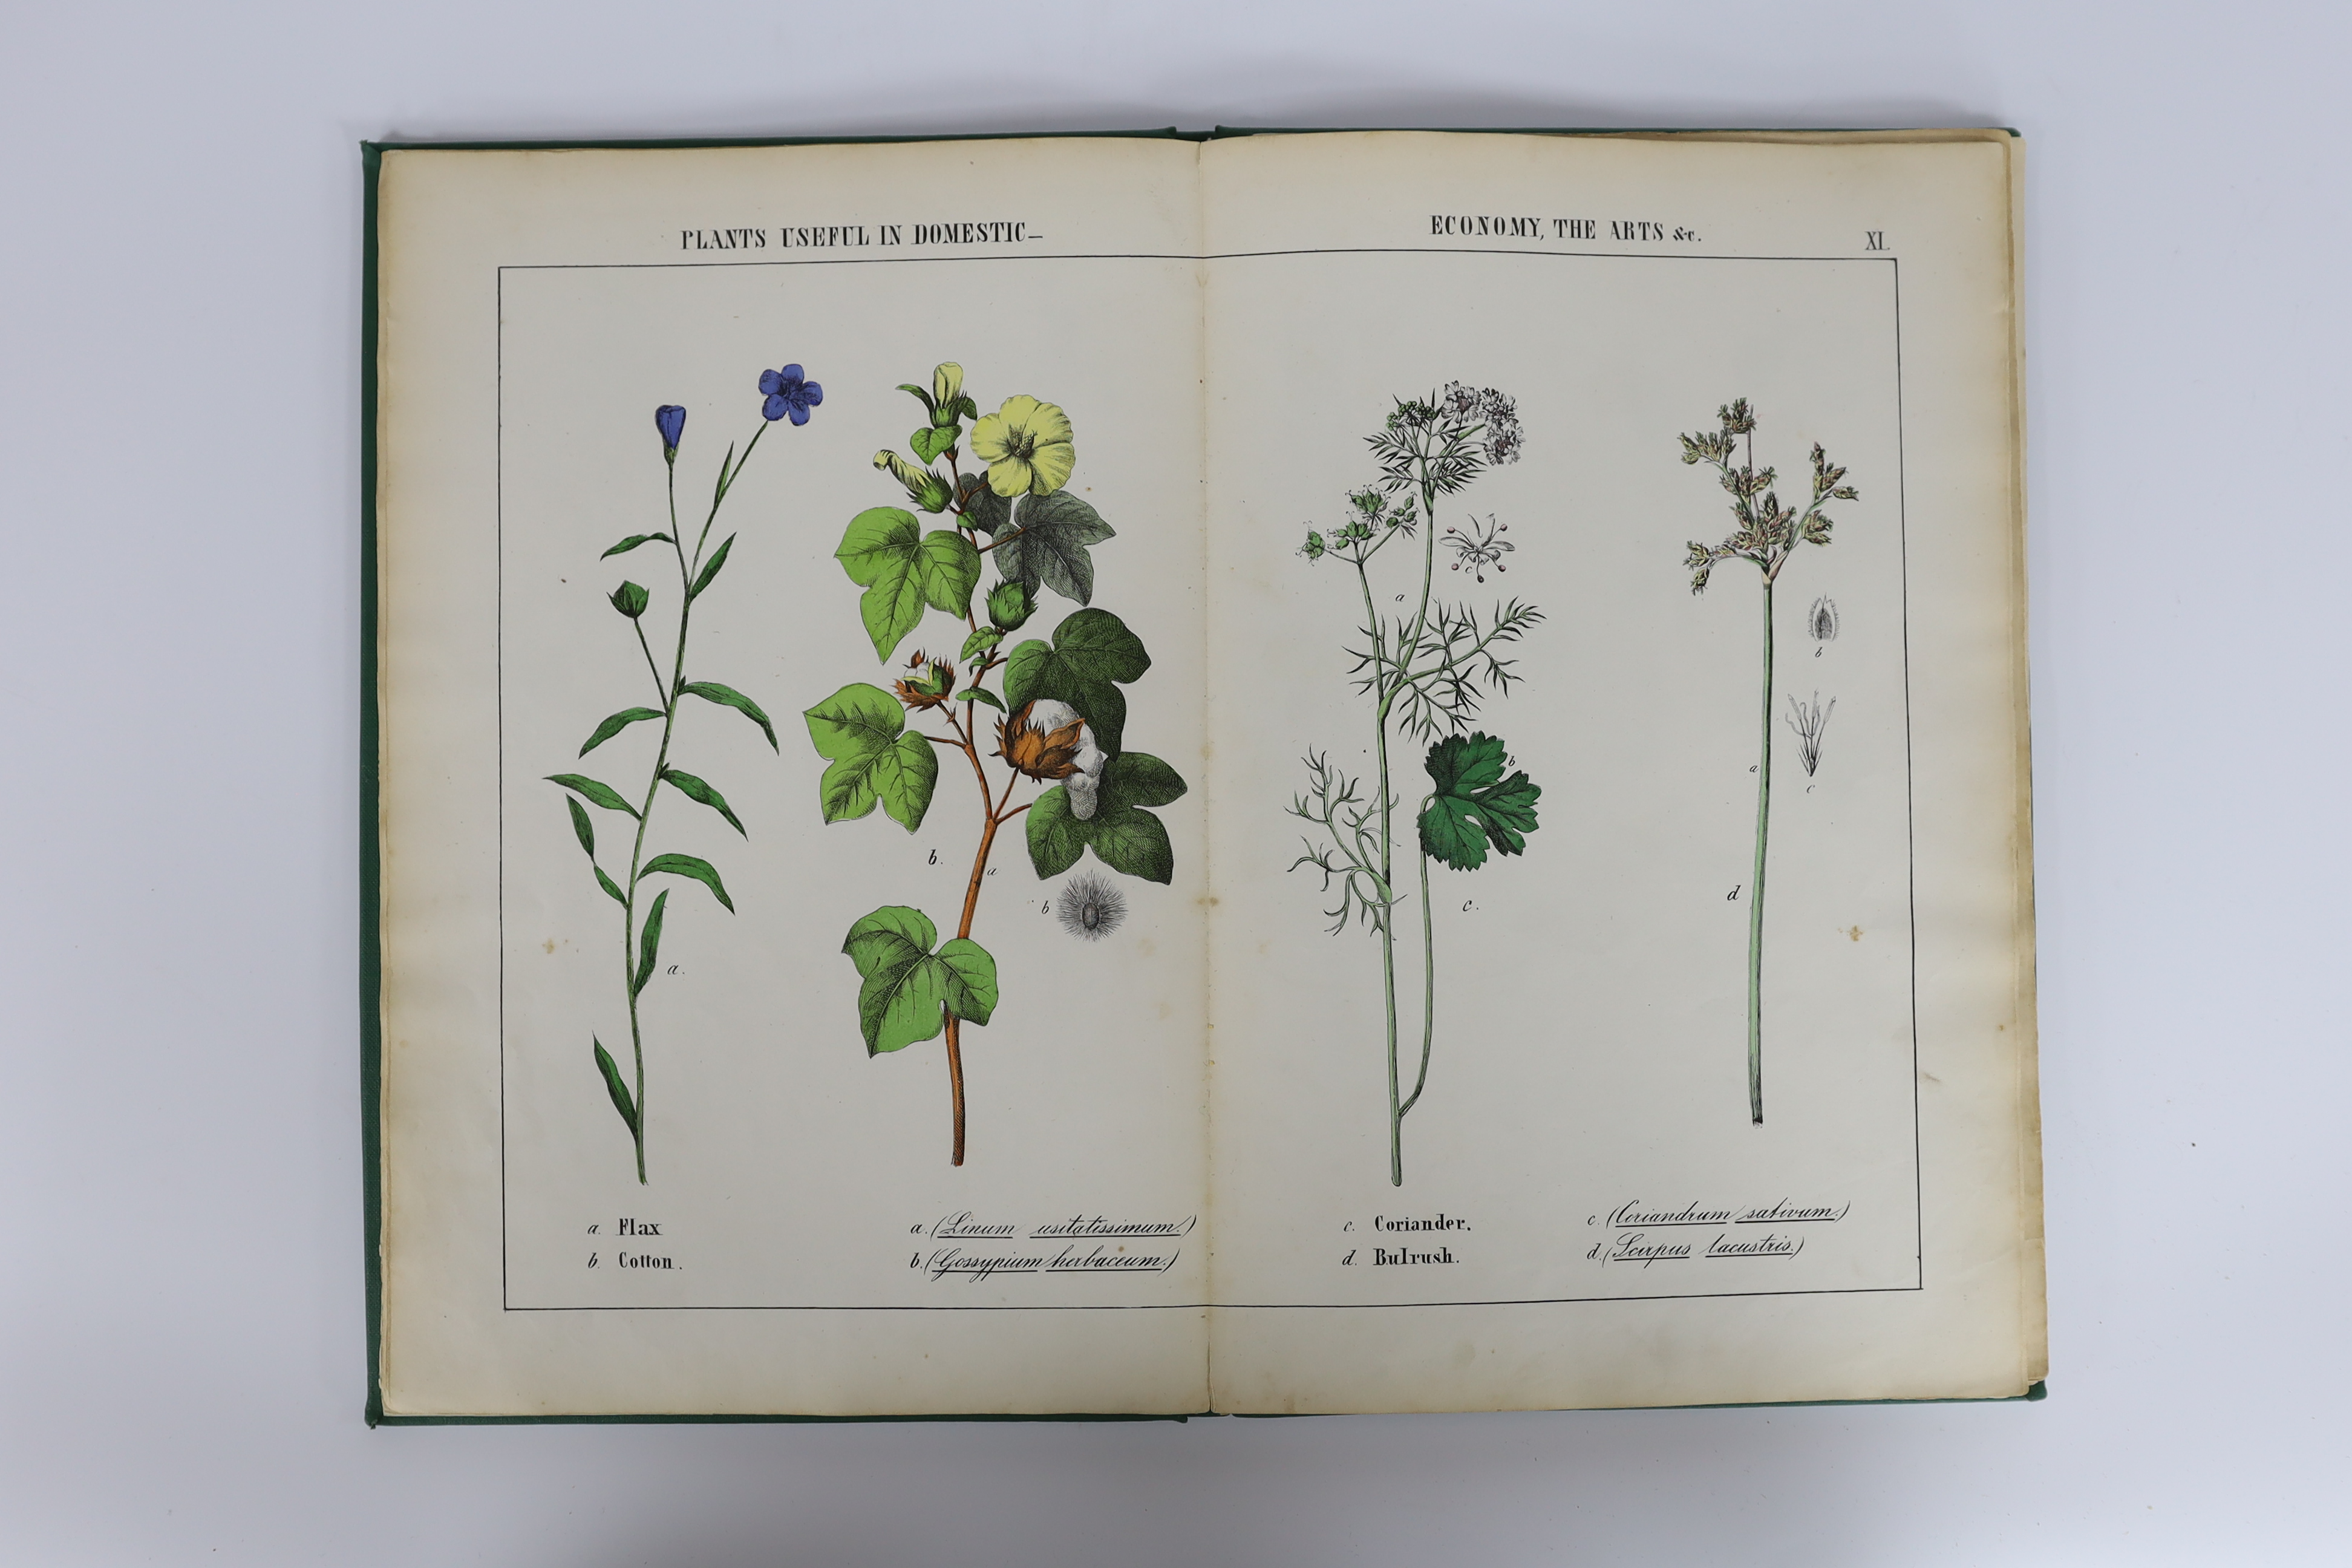 [Yonge, Charlotte Mary] - The Instructive Picture Book, or Lessons from the Vegetable World, tall 4to, original pictorial boards, with 31 striking hand-coloured double-page plates of fruit, flowers, vegetables, fungi etc